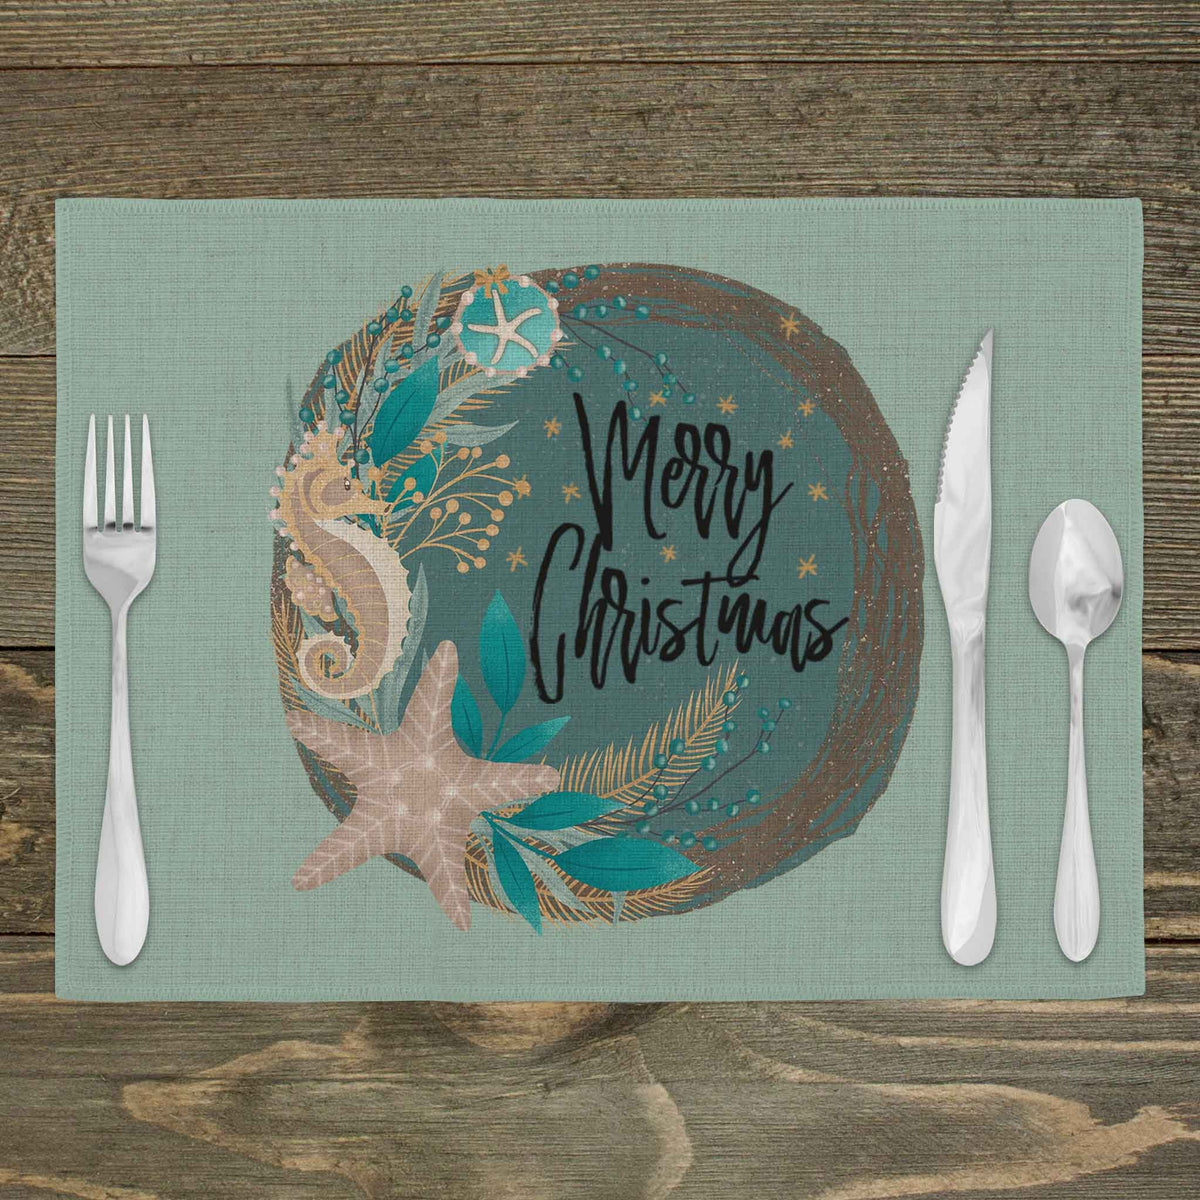 Custom Placemats | Personalized Dining and Serving | Seahorse Wreath